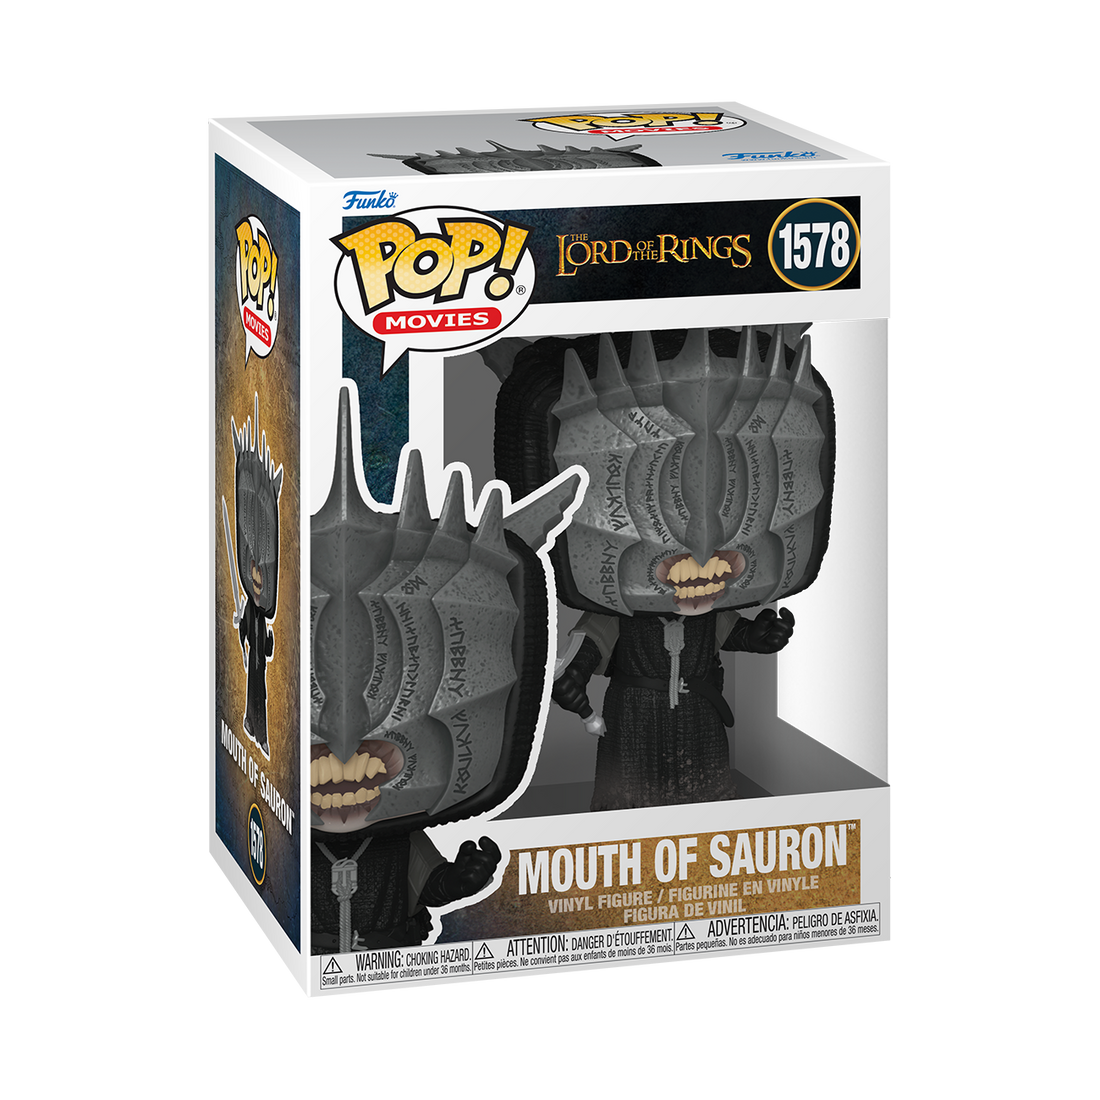 Funko Pop! Movie Lord Of The Rings 1578 Mouth of Sauron Funko